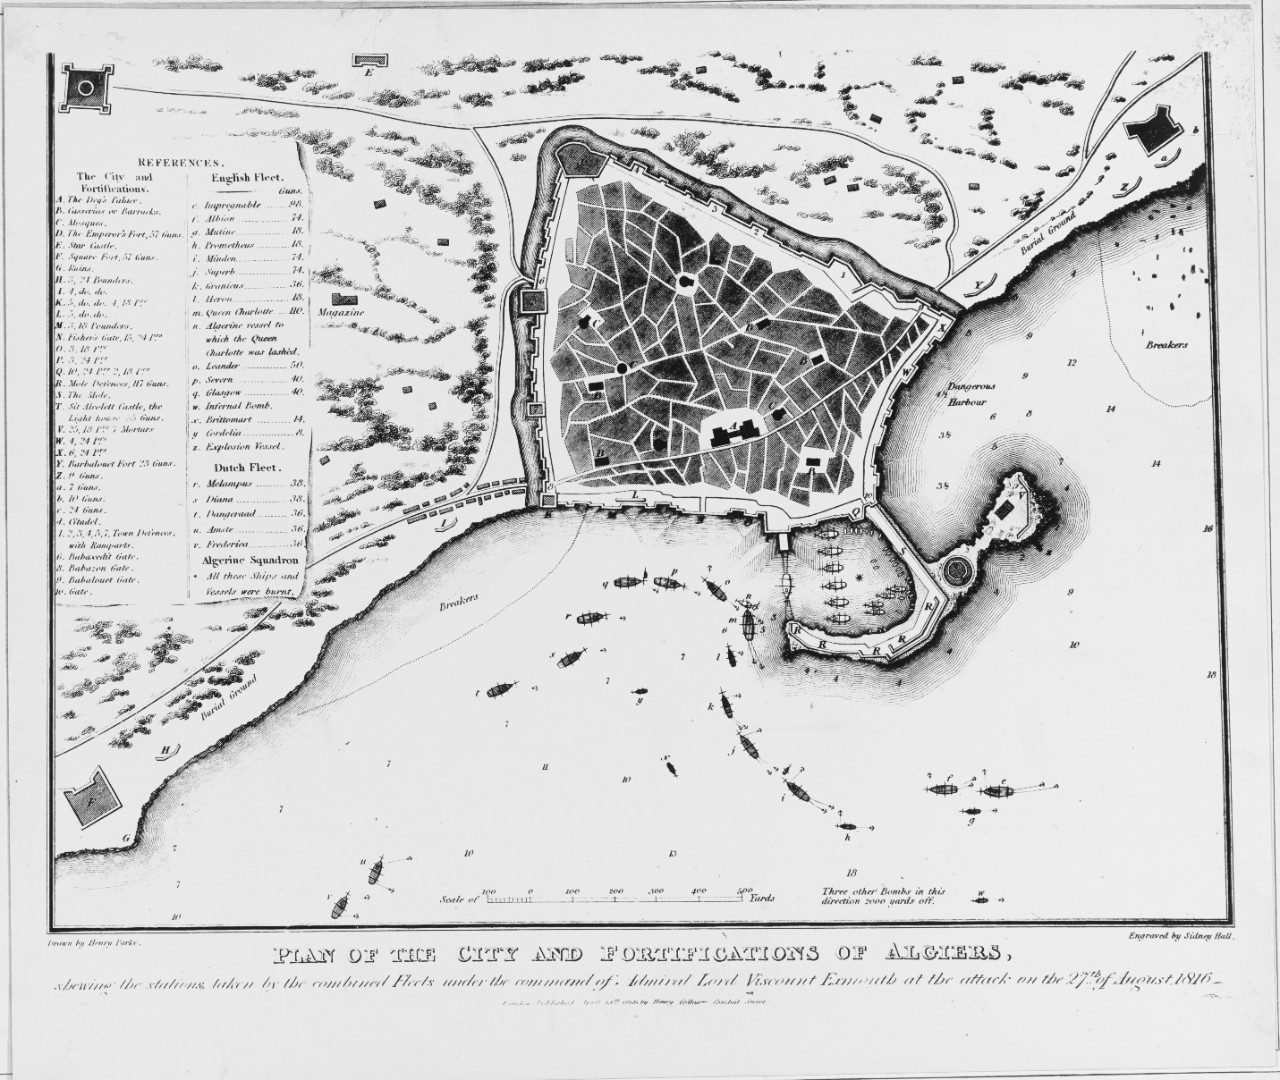 Plan of the City and Fortifications of Algiers, 1816.